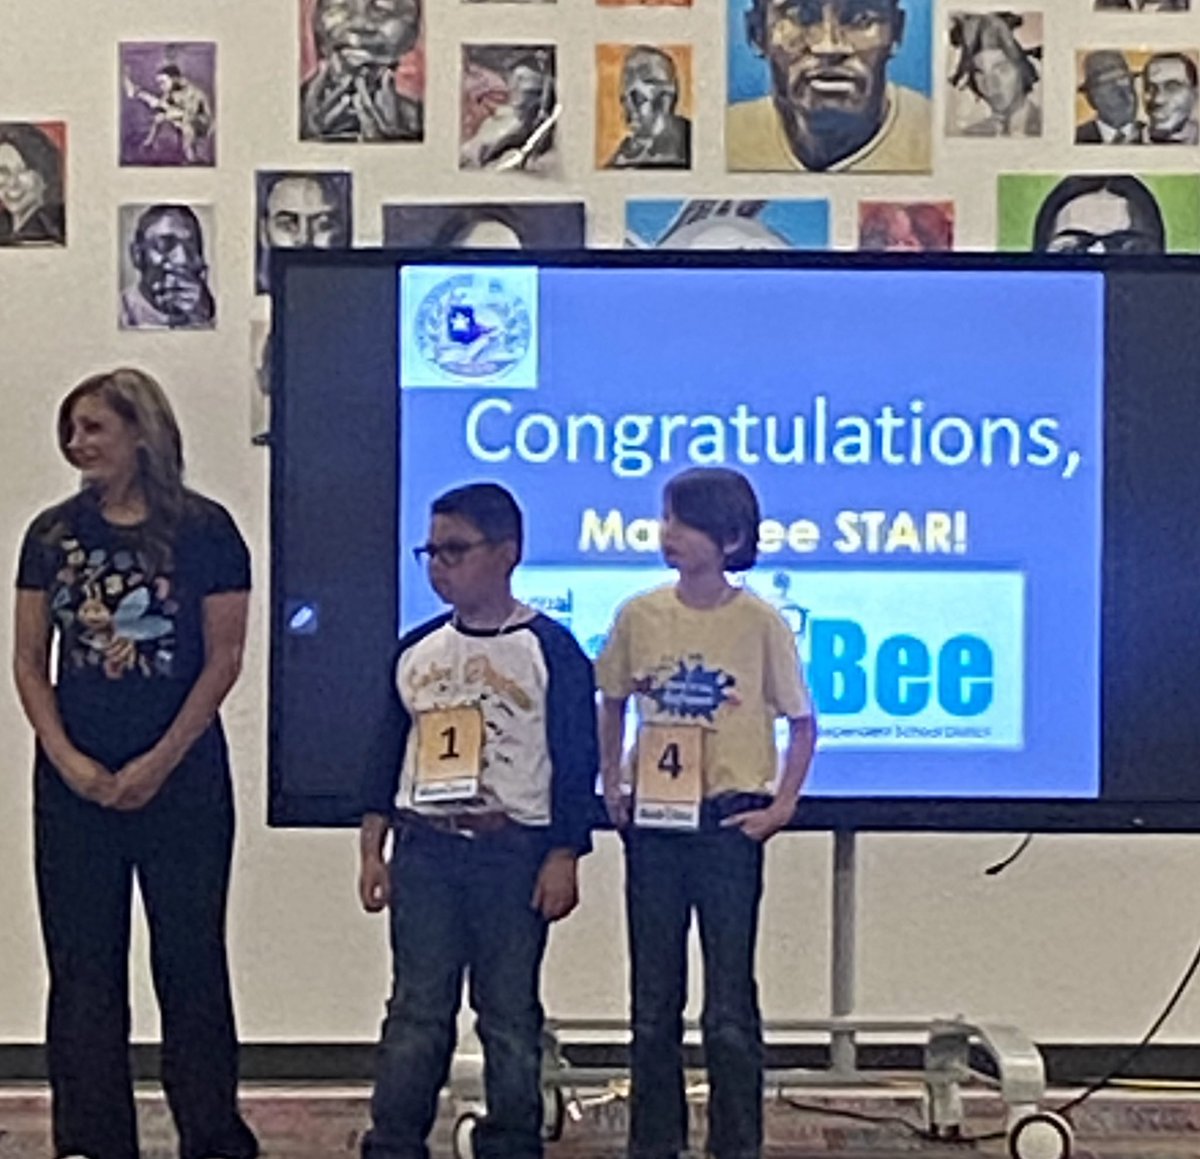 💙🐝Congratulations to our 3rd grade Math Bee winner, Jose Valles, for clinching 2nd place in the SISD district competition! 🐝💙 Way to show off those math skills! #MathBee #TEAMDrugan @RAlva_JDS @cmercado_JDS @vesparza_JDS